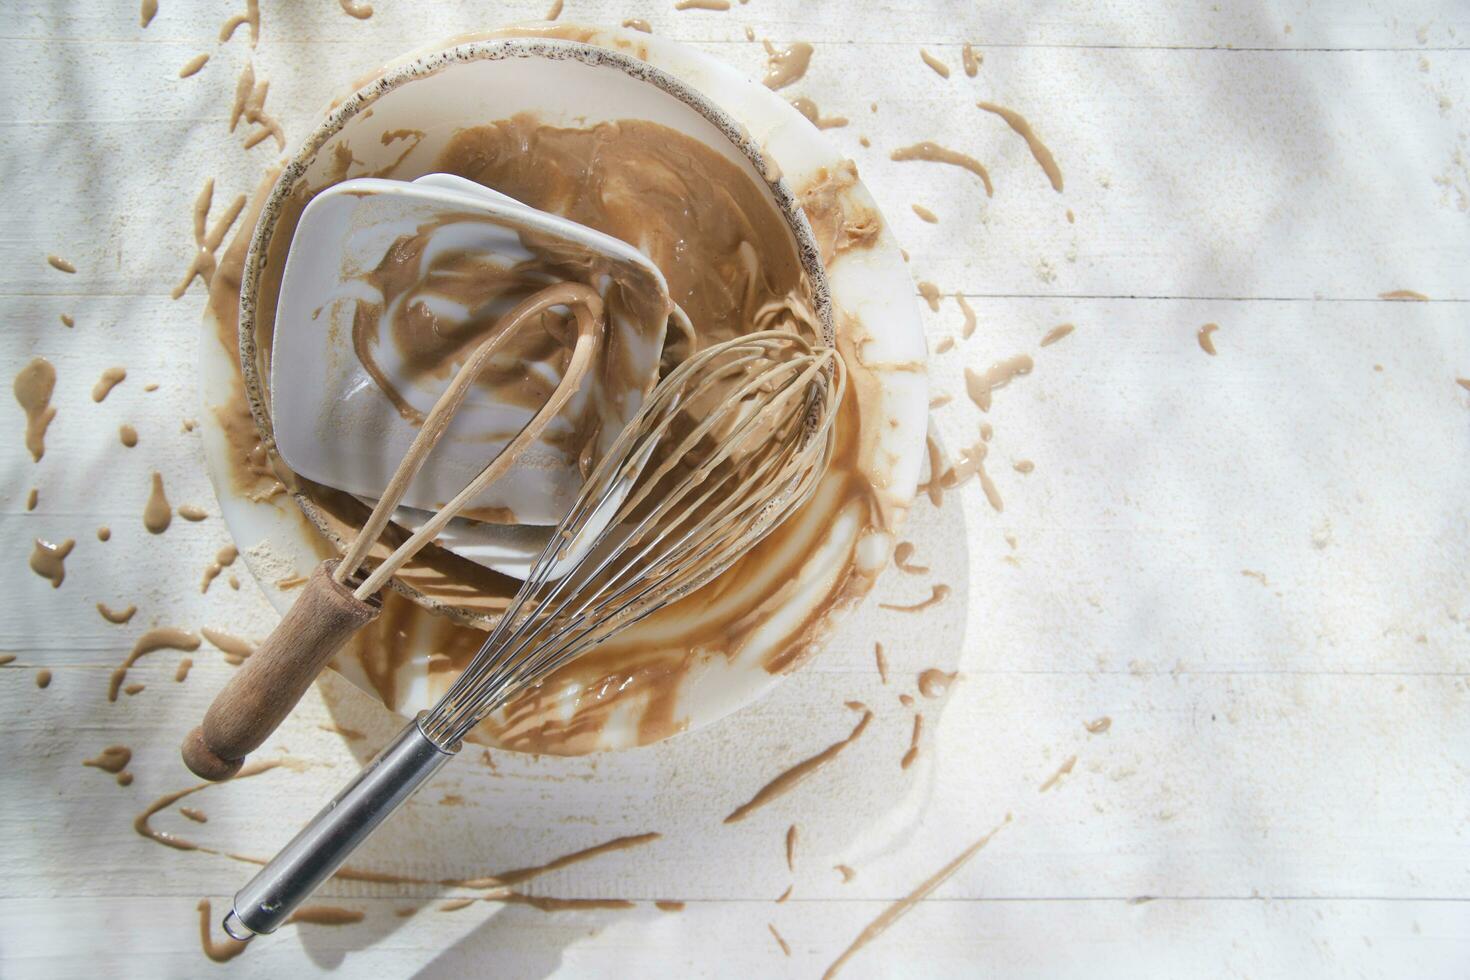 Whip and after preparation of sweet dishes photo